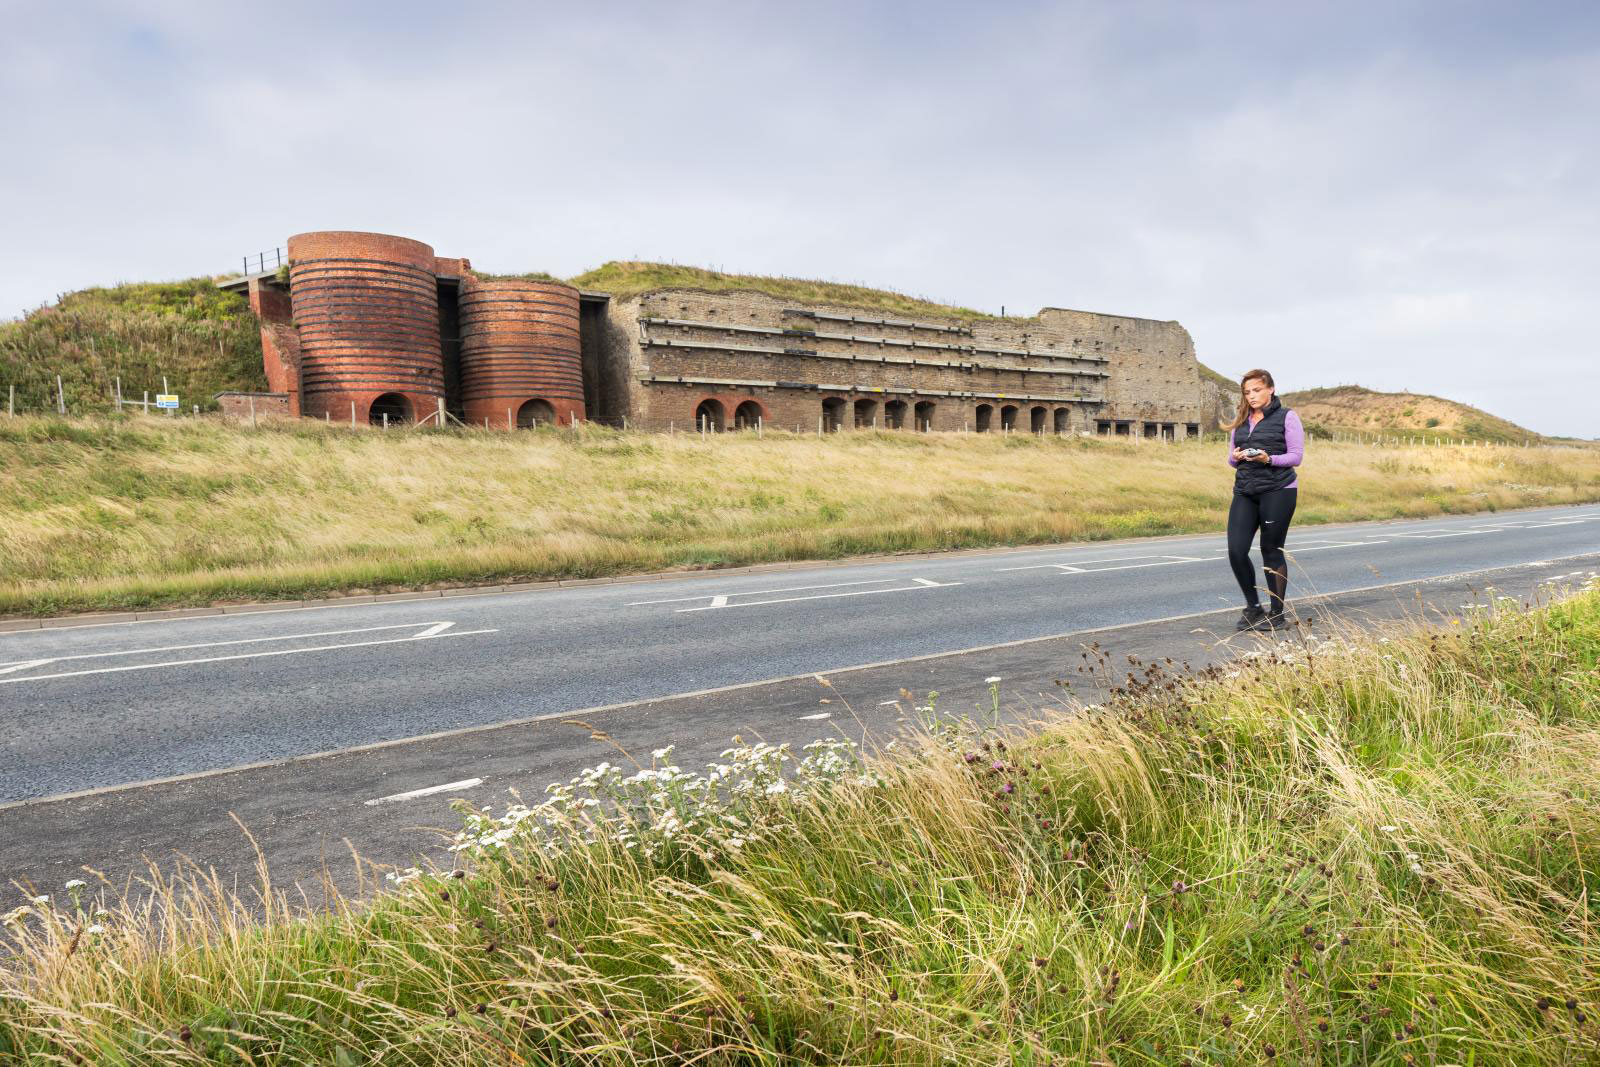 Stone- and brick-built battery structure with horizontal reinforcing timbers with a series of ground-level arched openings to the lime kilns it houses. Dune grass grows in front of it and grassy banks protrude above and either side of the structure.